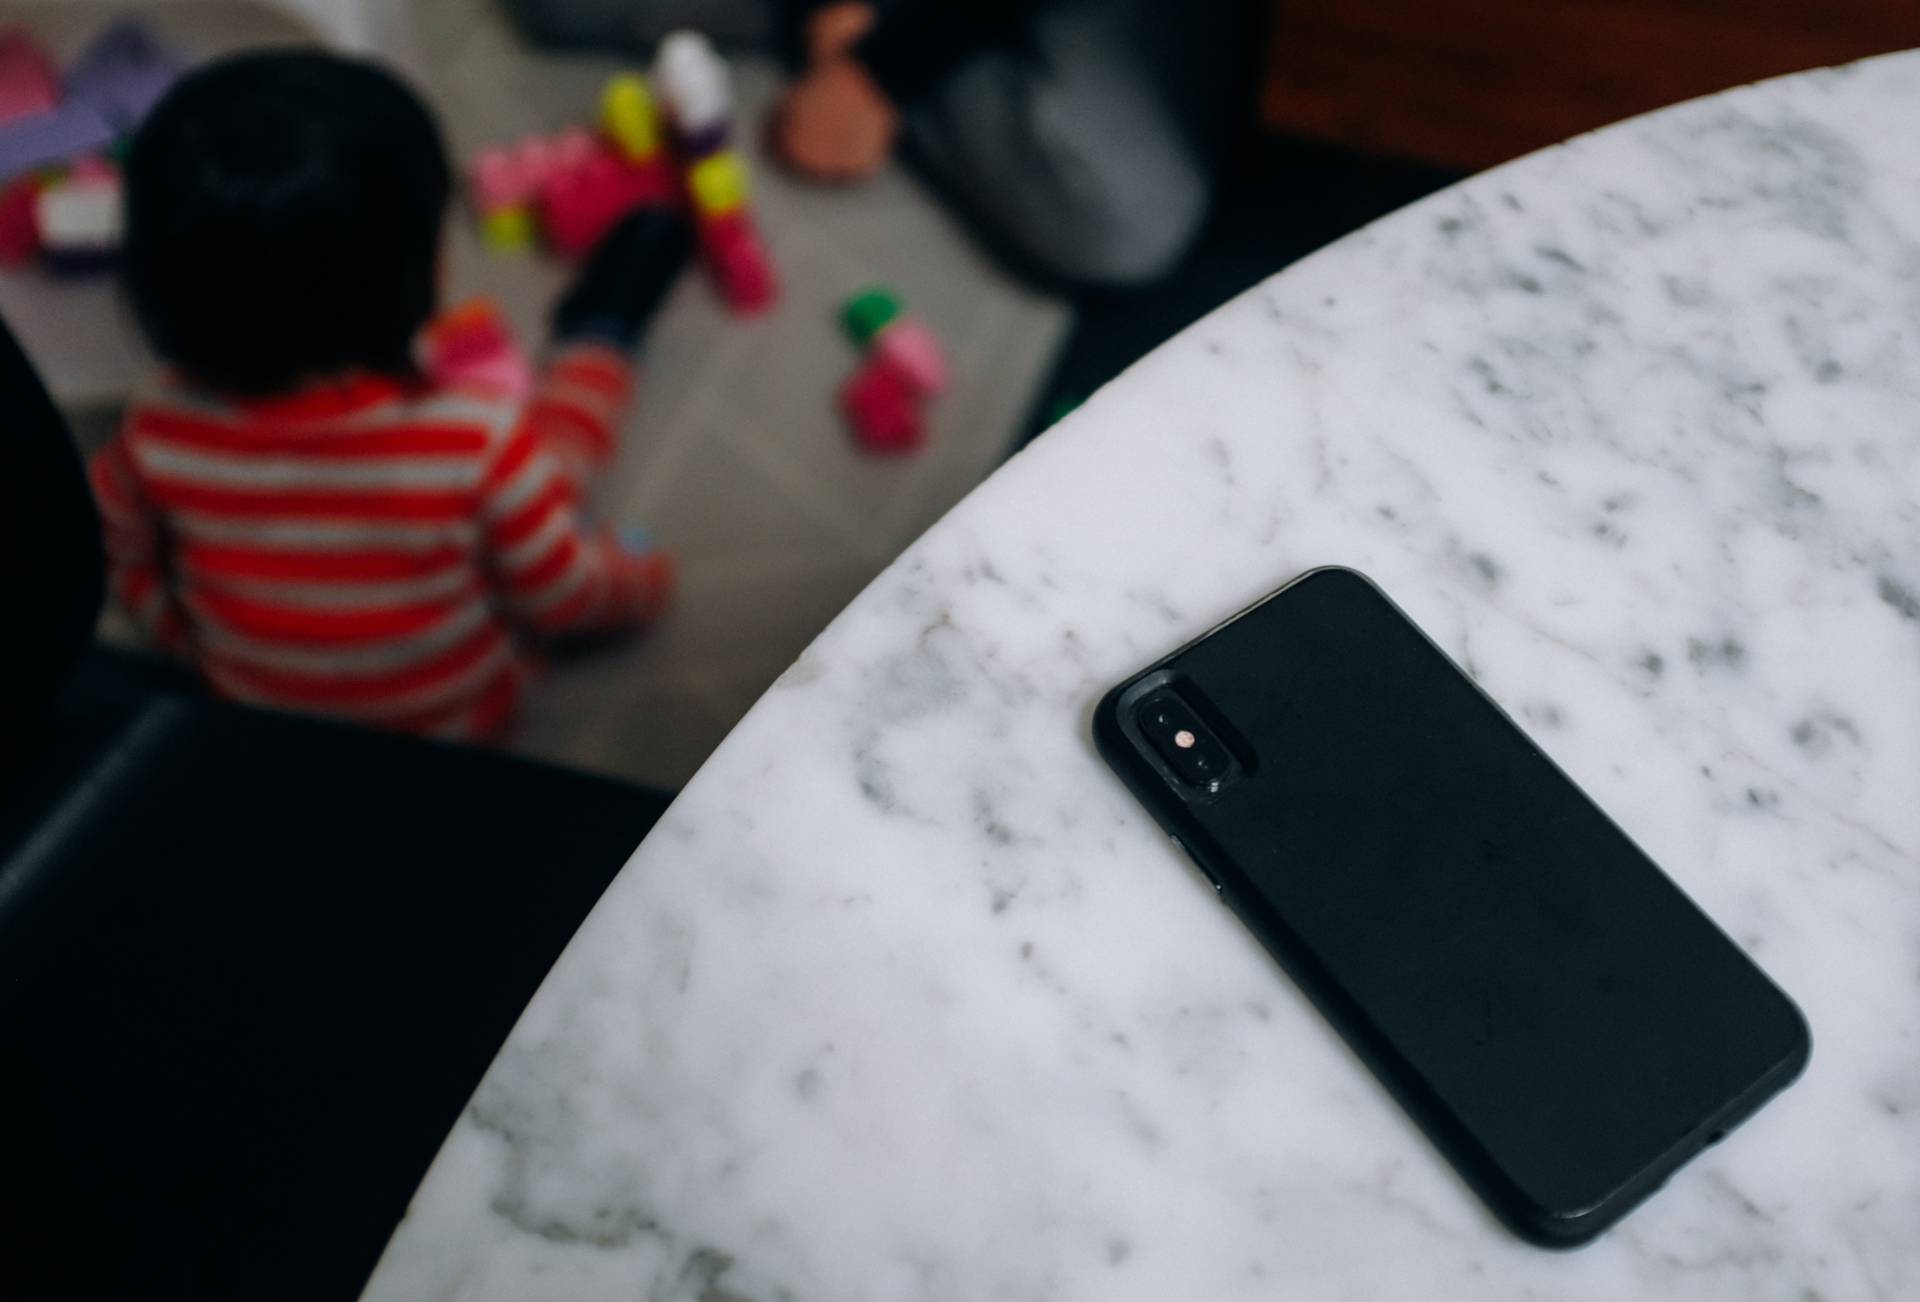 Black mobile phone on marble table with young child playing in background